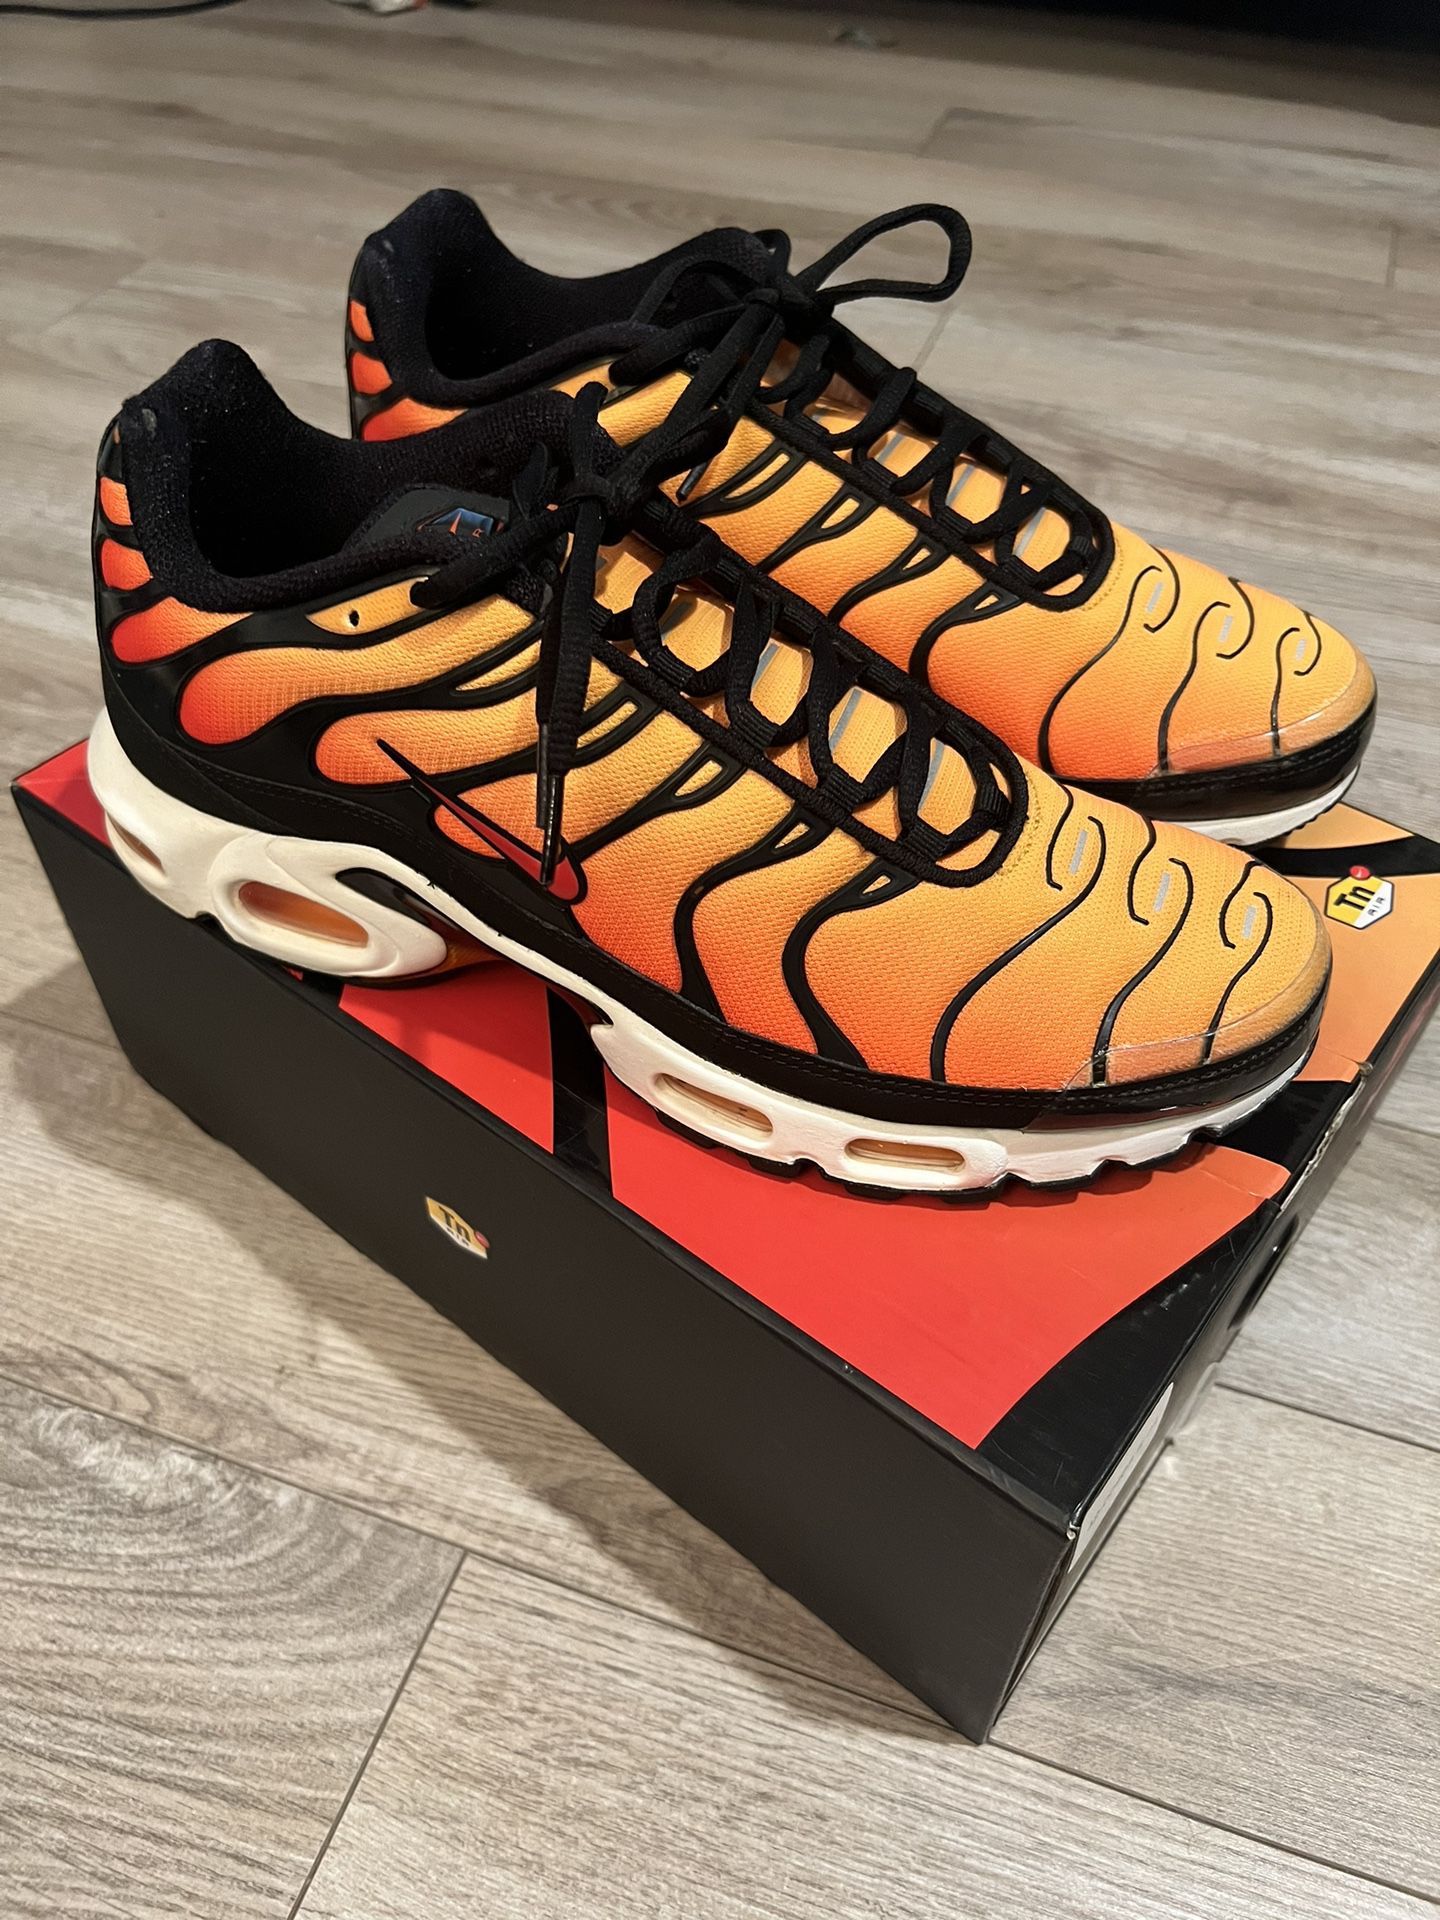 scheren Senaat stortbui Nike Air Max Plus OG Sunset/ Pimento (2018) for Sale in New Haven, CT -  OfferUp